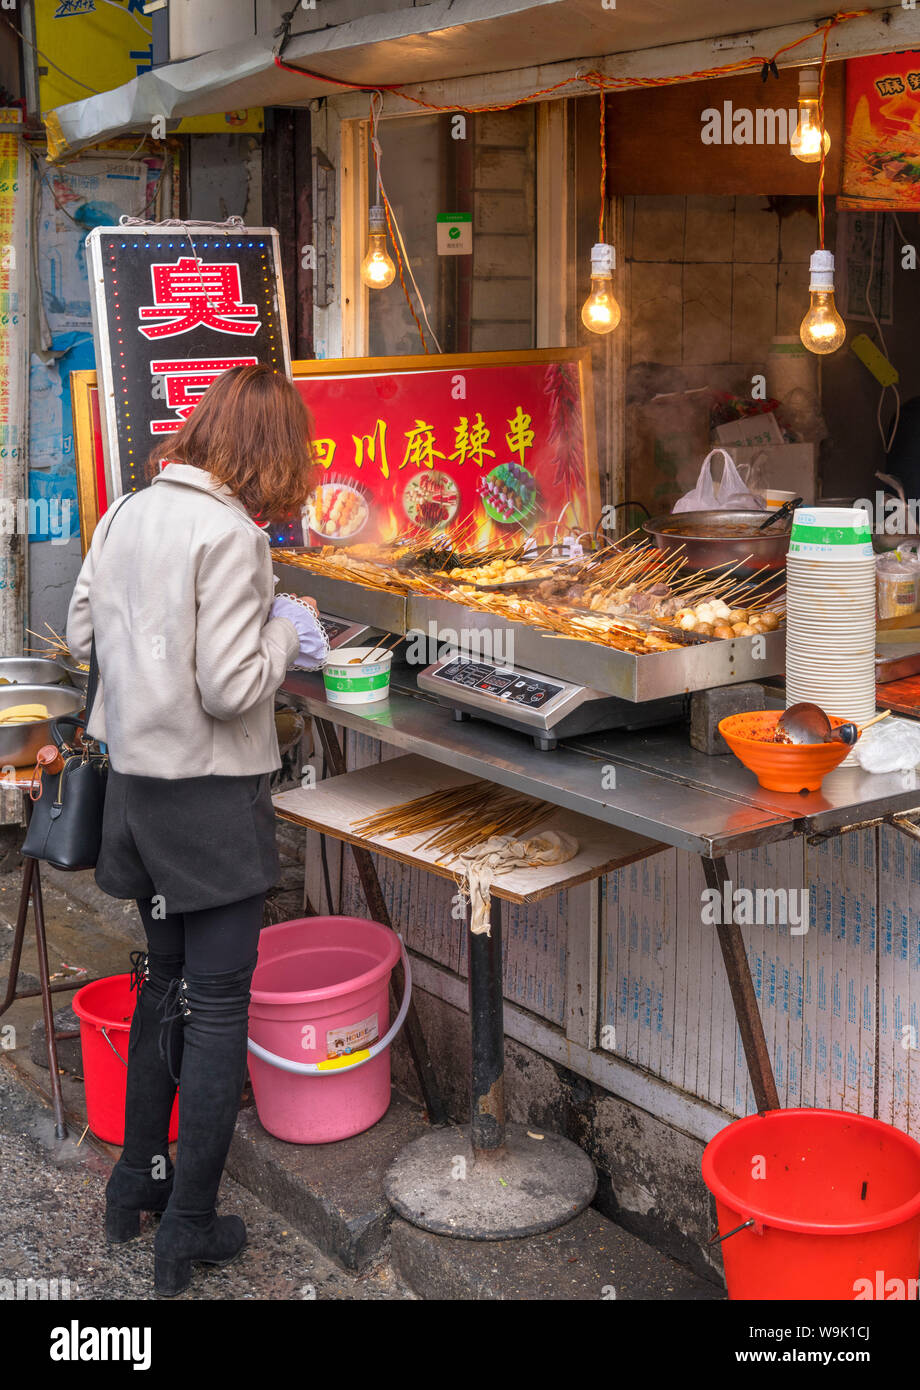 Shanghai street food. Young woman buying food at a traditional food stall in the Old City, Shanghai, China Stock Photo